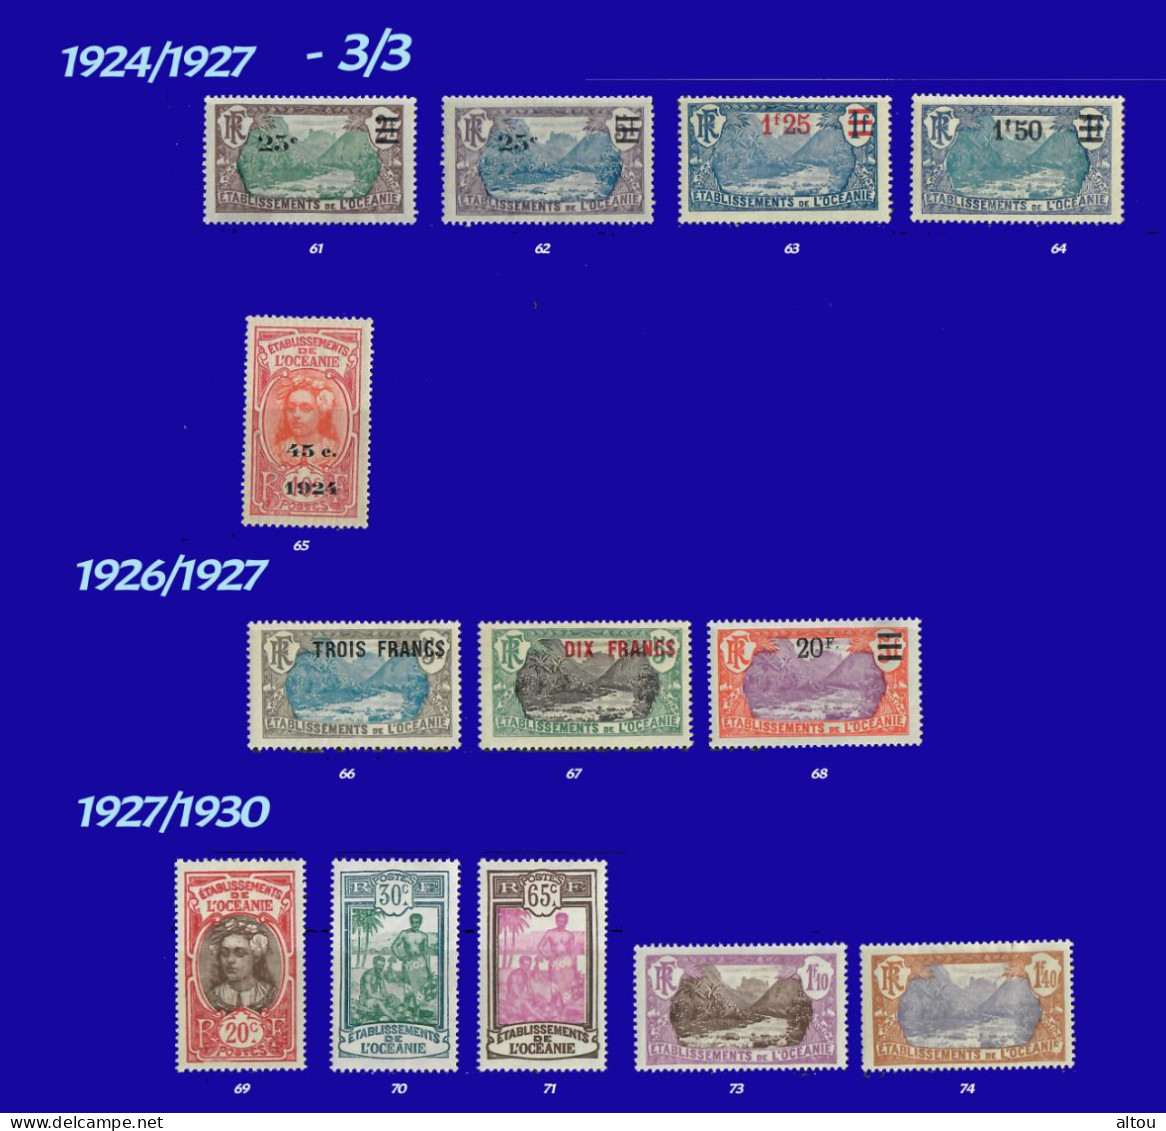 OCEANIE - 1915/1931 - 36 Timbres * (MLH) Dont 4 Offerts - Neufs